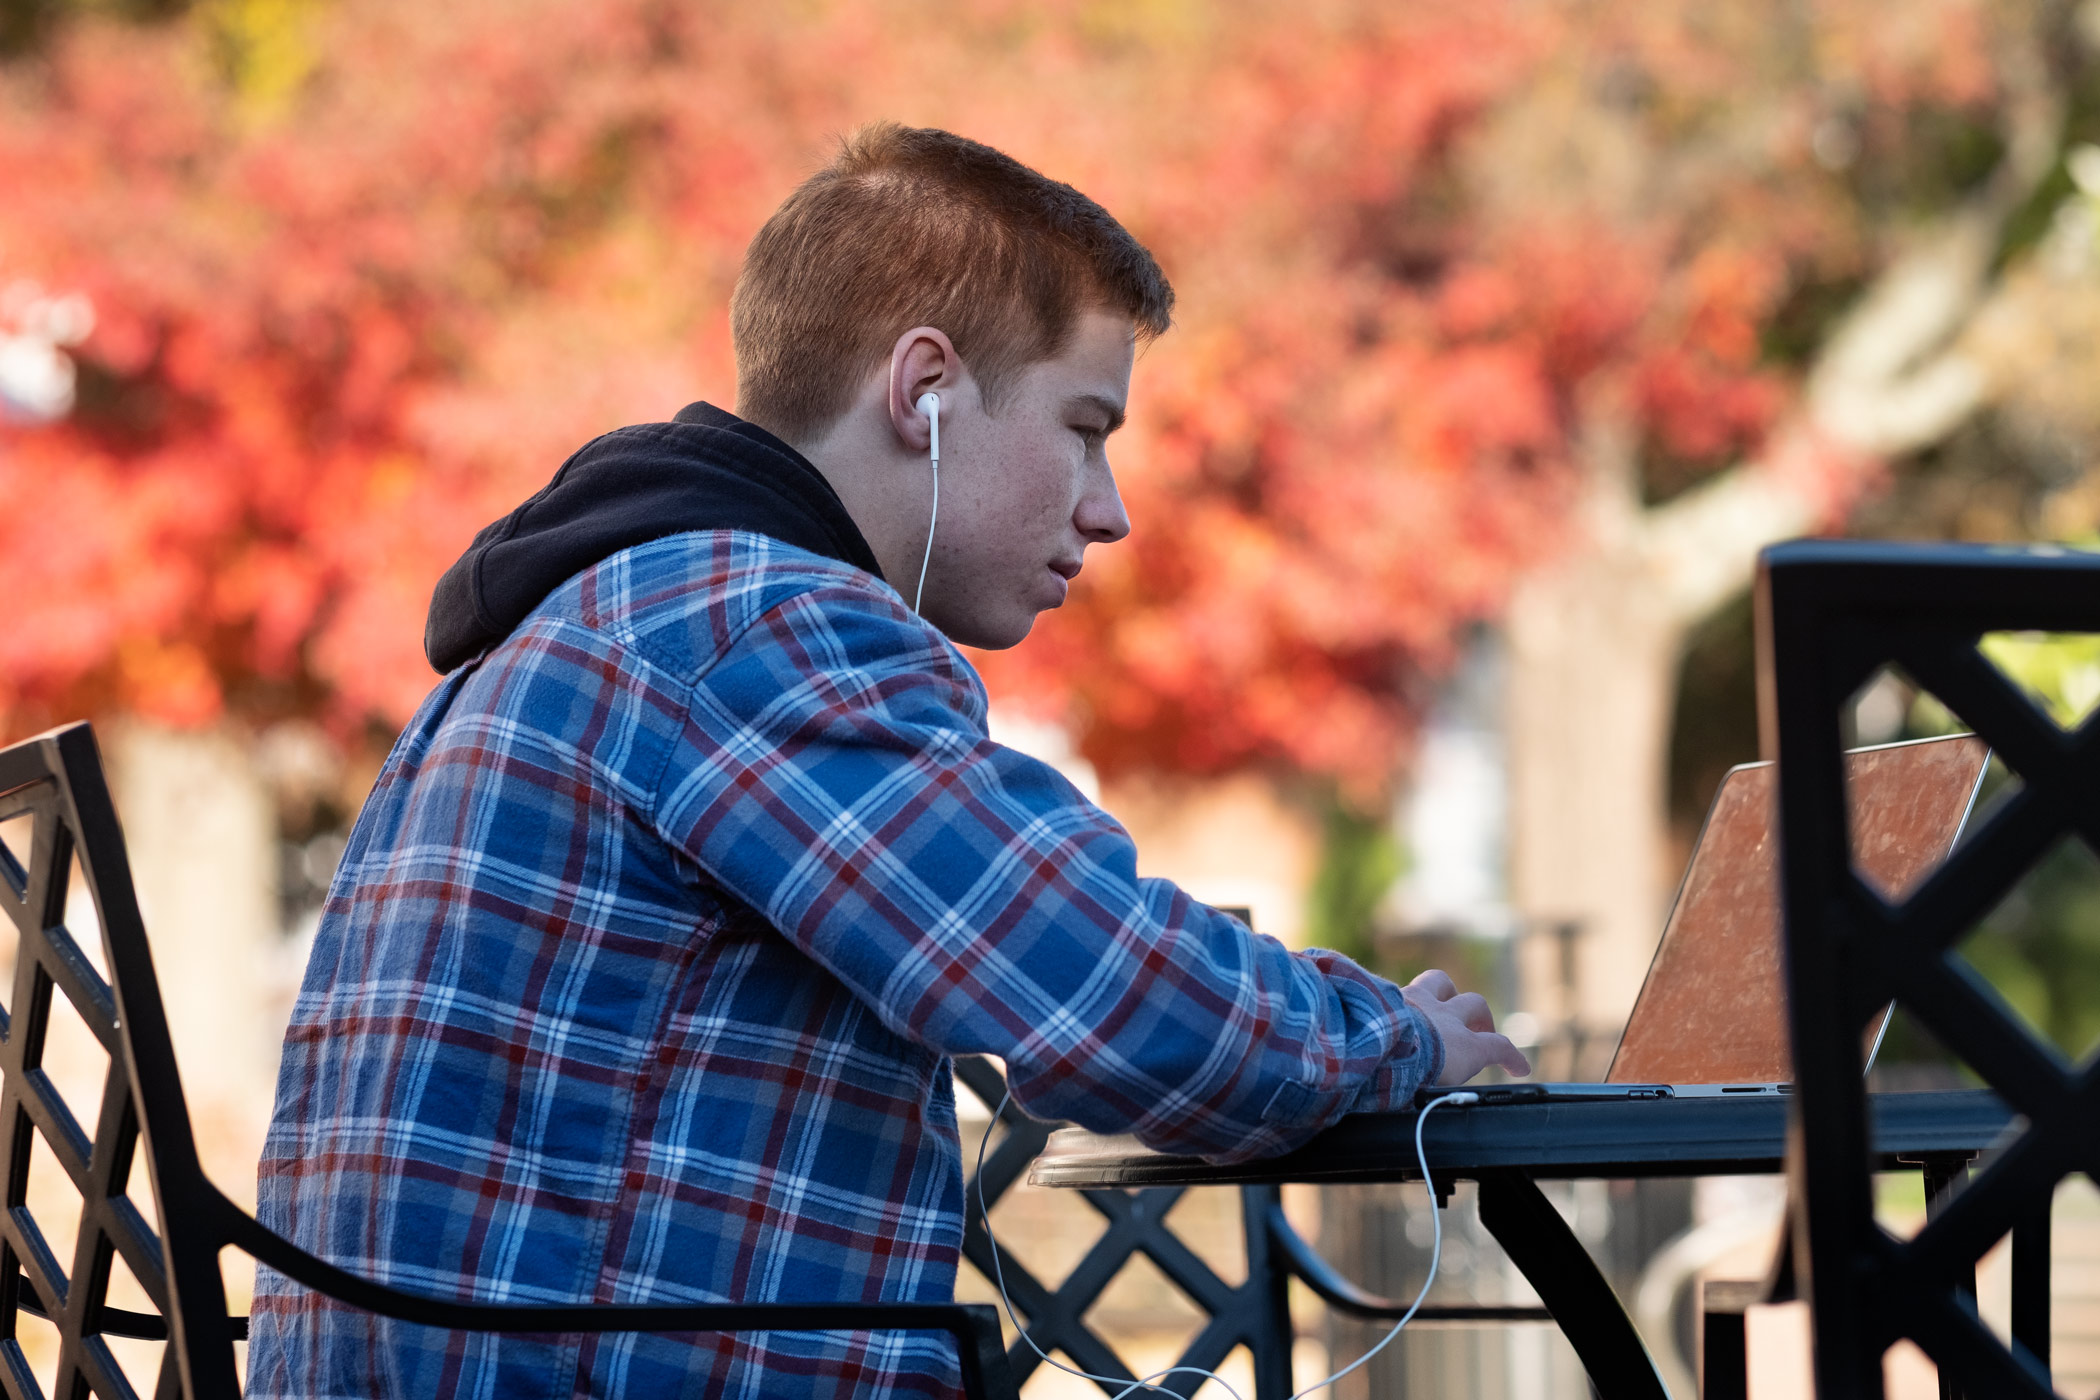 With fall leaves in the background, Senior Communication Major Cameron O&amp;#039;Daniel works on his laptop on an outdoor table.